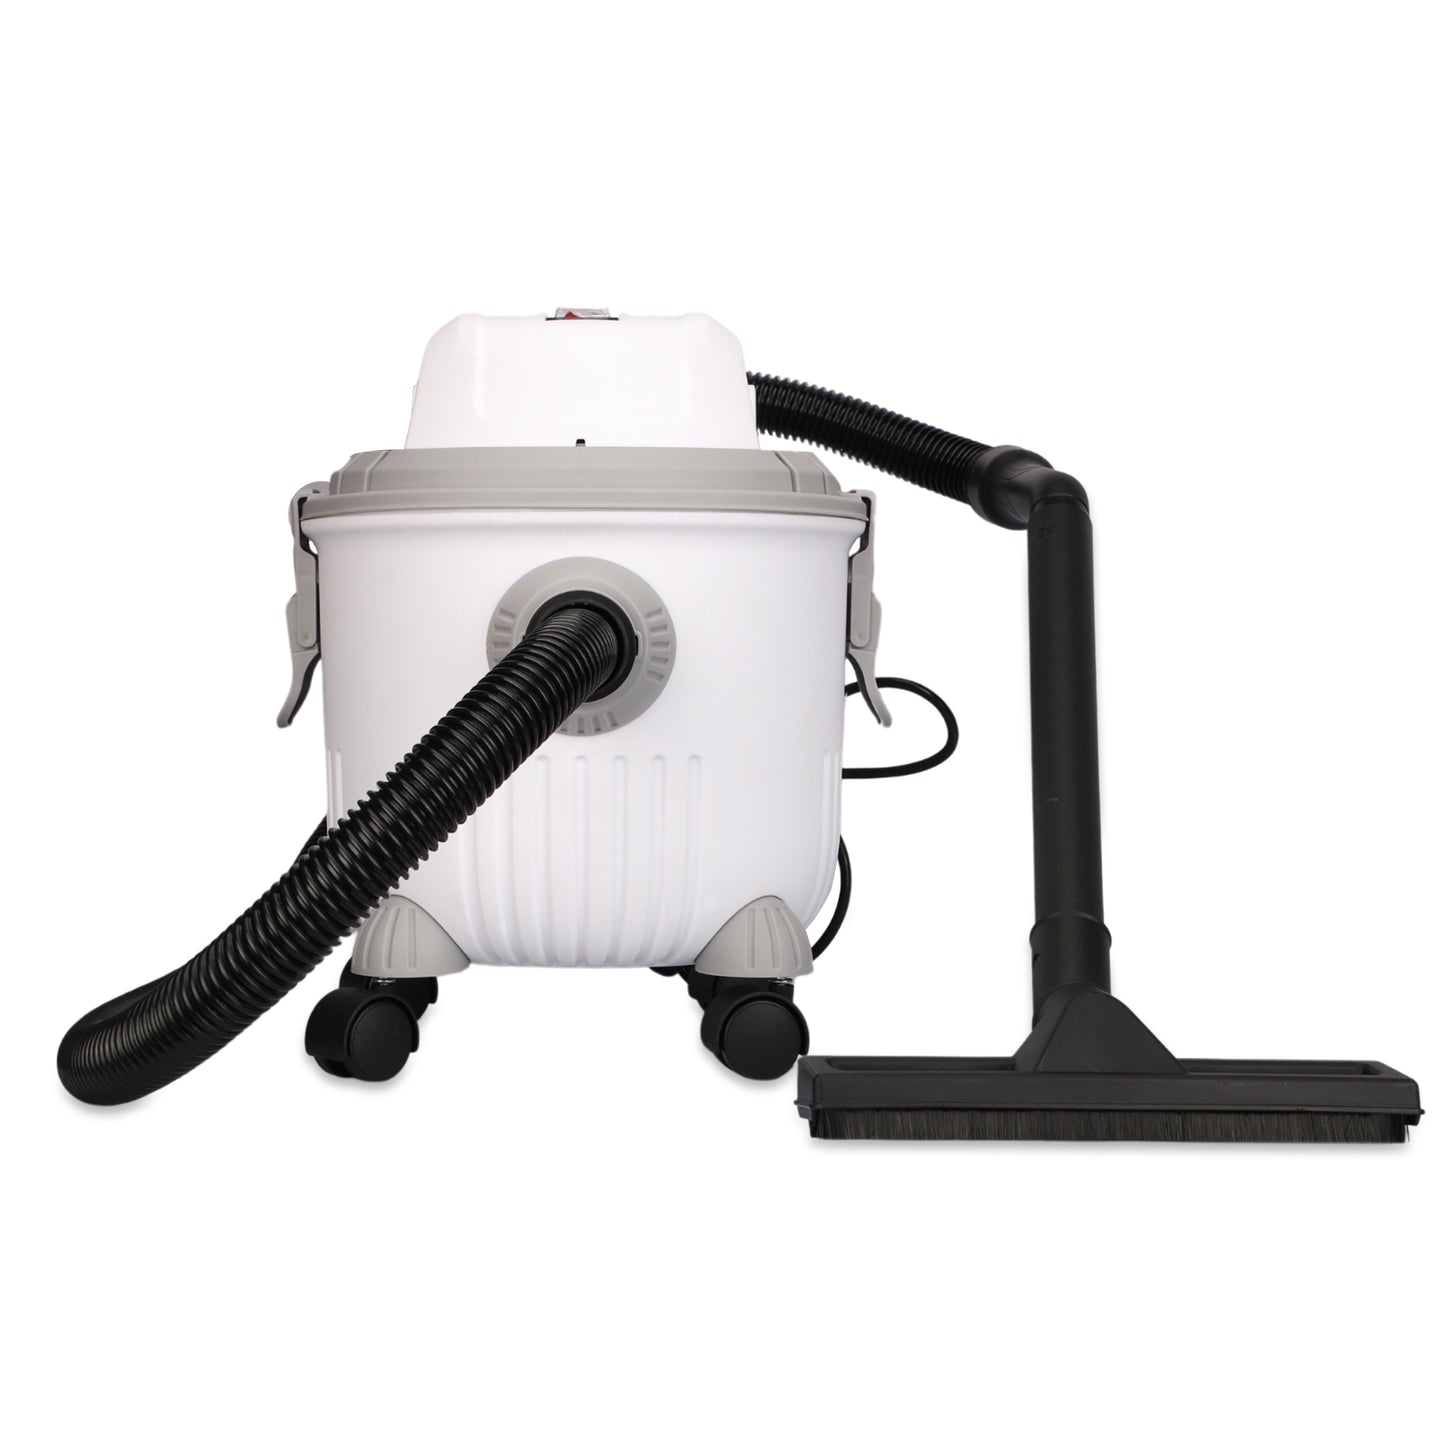 STARQ Wet and Dry Vacuum Cleaner for Home| 1000 Watt & 17 Kpa Suction |3in1 Multifunction Wet/Dry/Blowing|Break Resistant Tank| 15 LTR